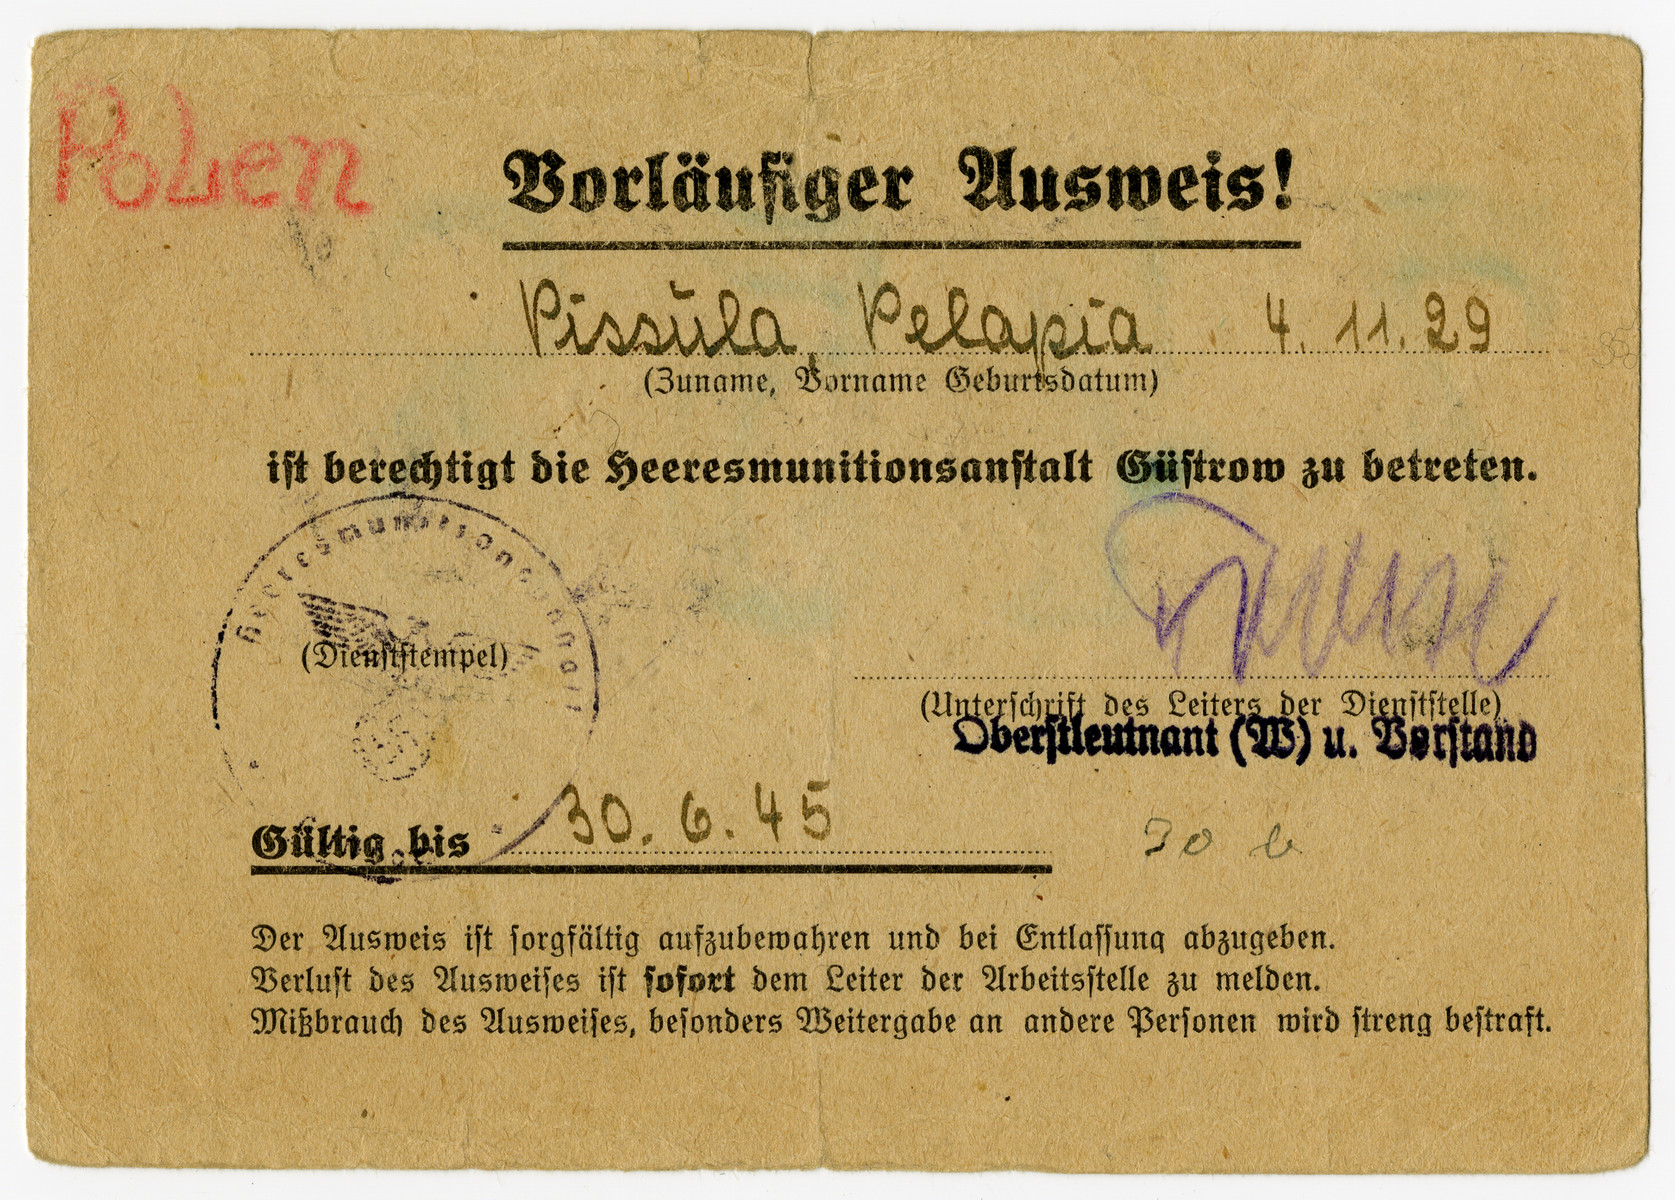 A temporary identification card issued to a Polish Jewish girl, Pola Fogelman, under a false name:  Pelagia Pisula.  The verso of the card has the prisoner number  7458.

The false last name is the name of her rescuer, Natalia Pisula.  The pass was used for Pola to get in and out of the Primerwald labor camp/munitions factory.